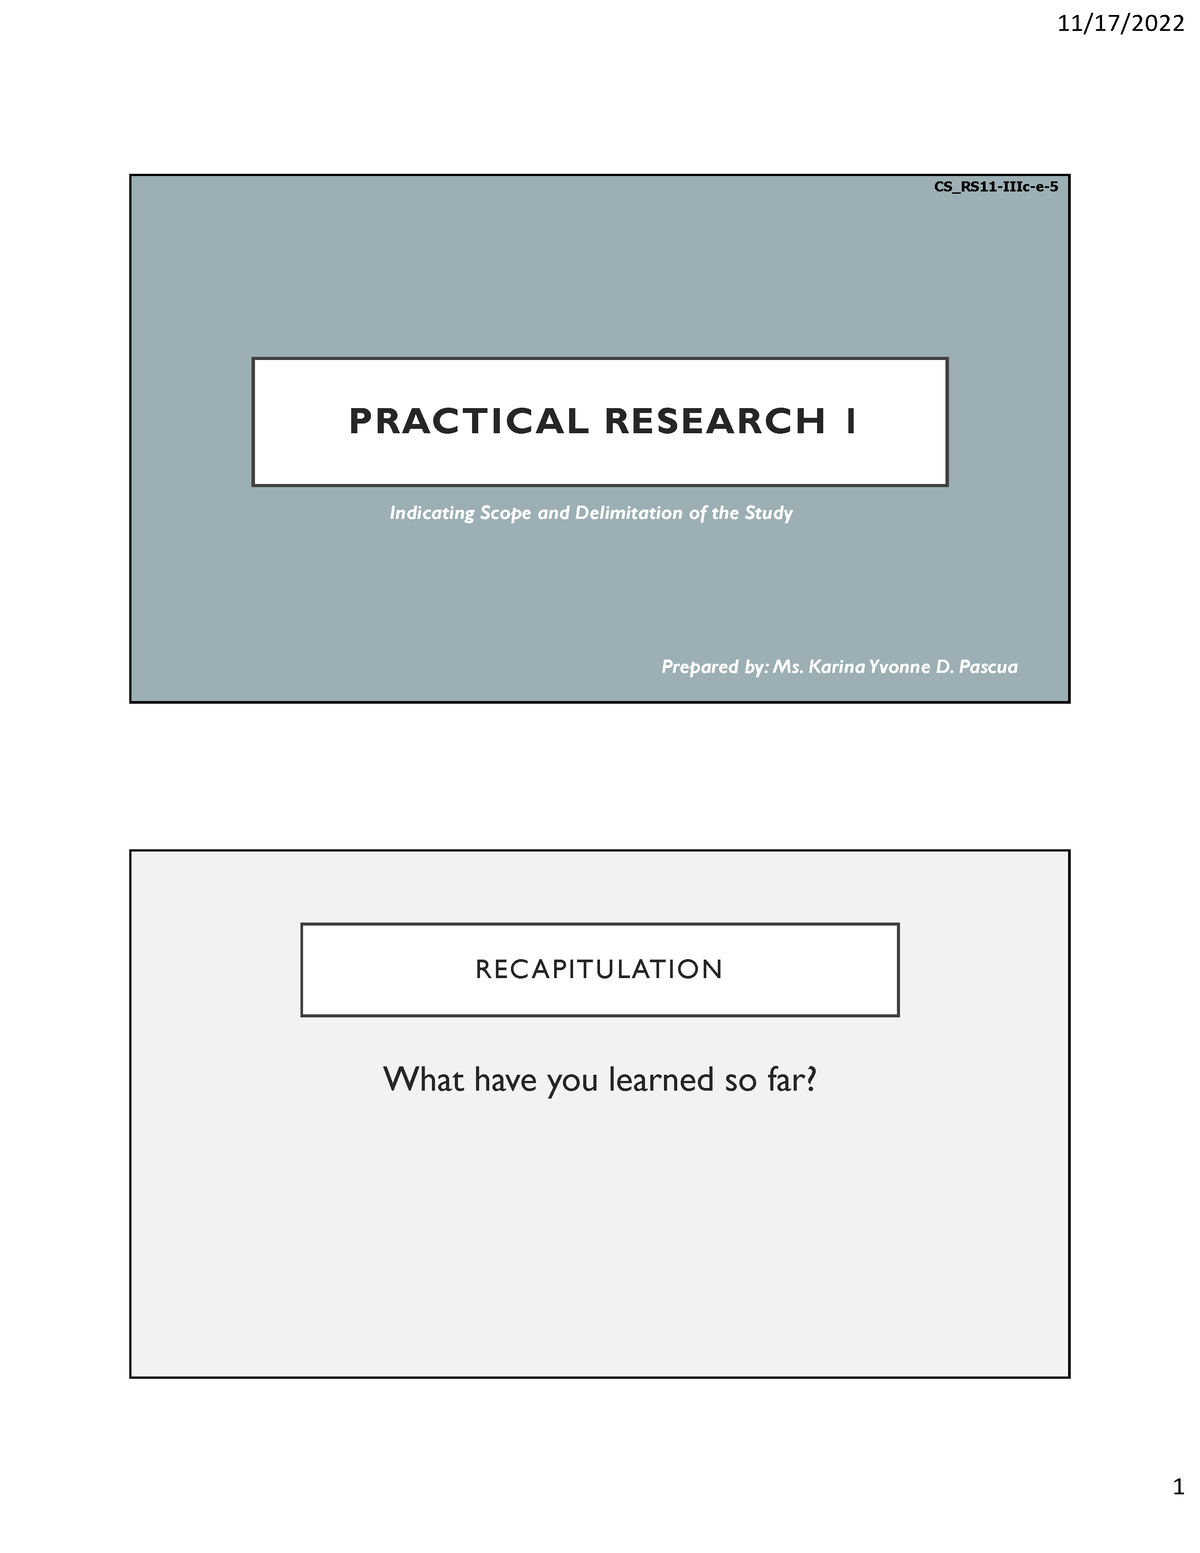 practical research scope and delimitation